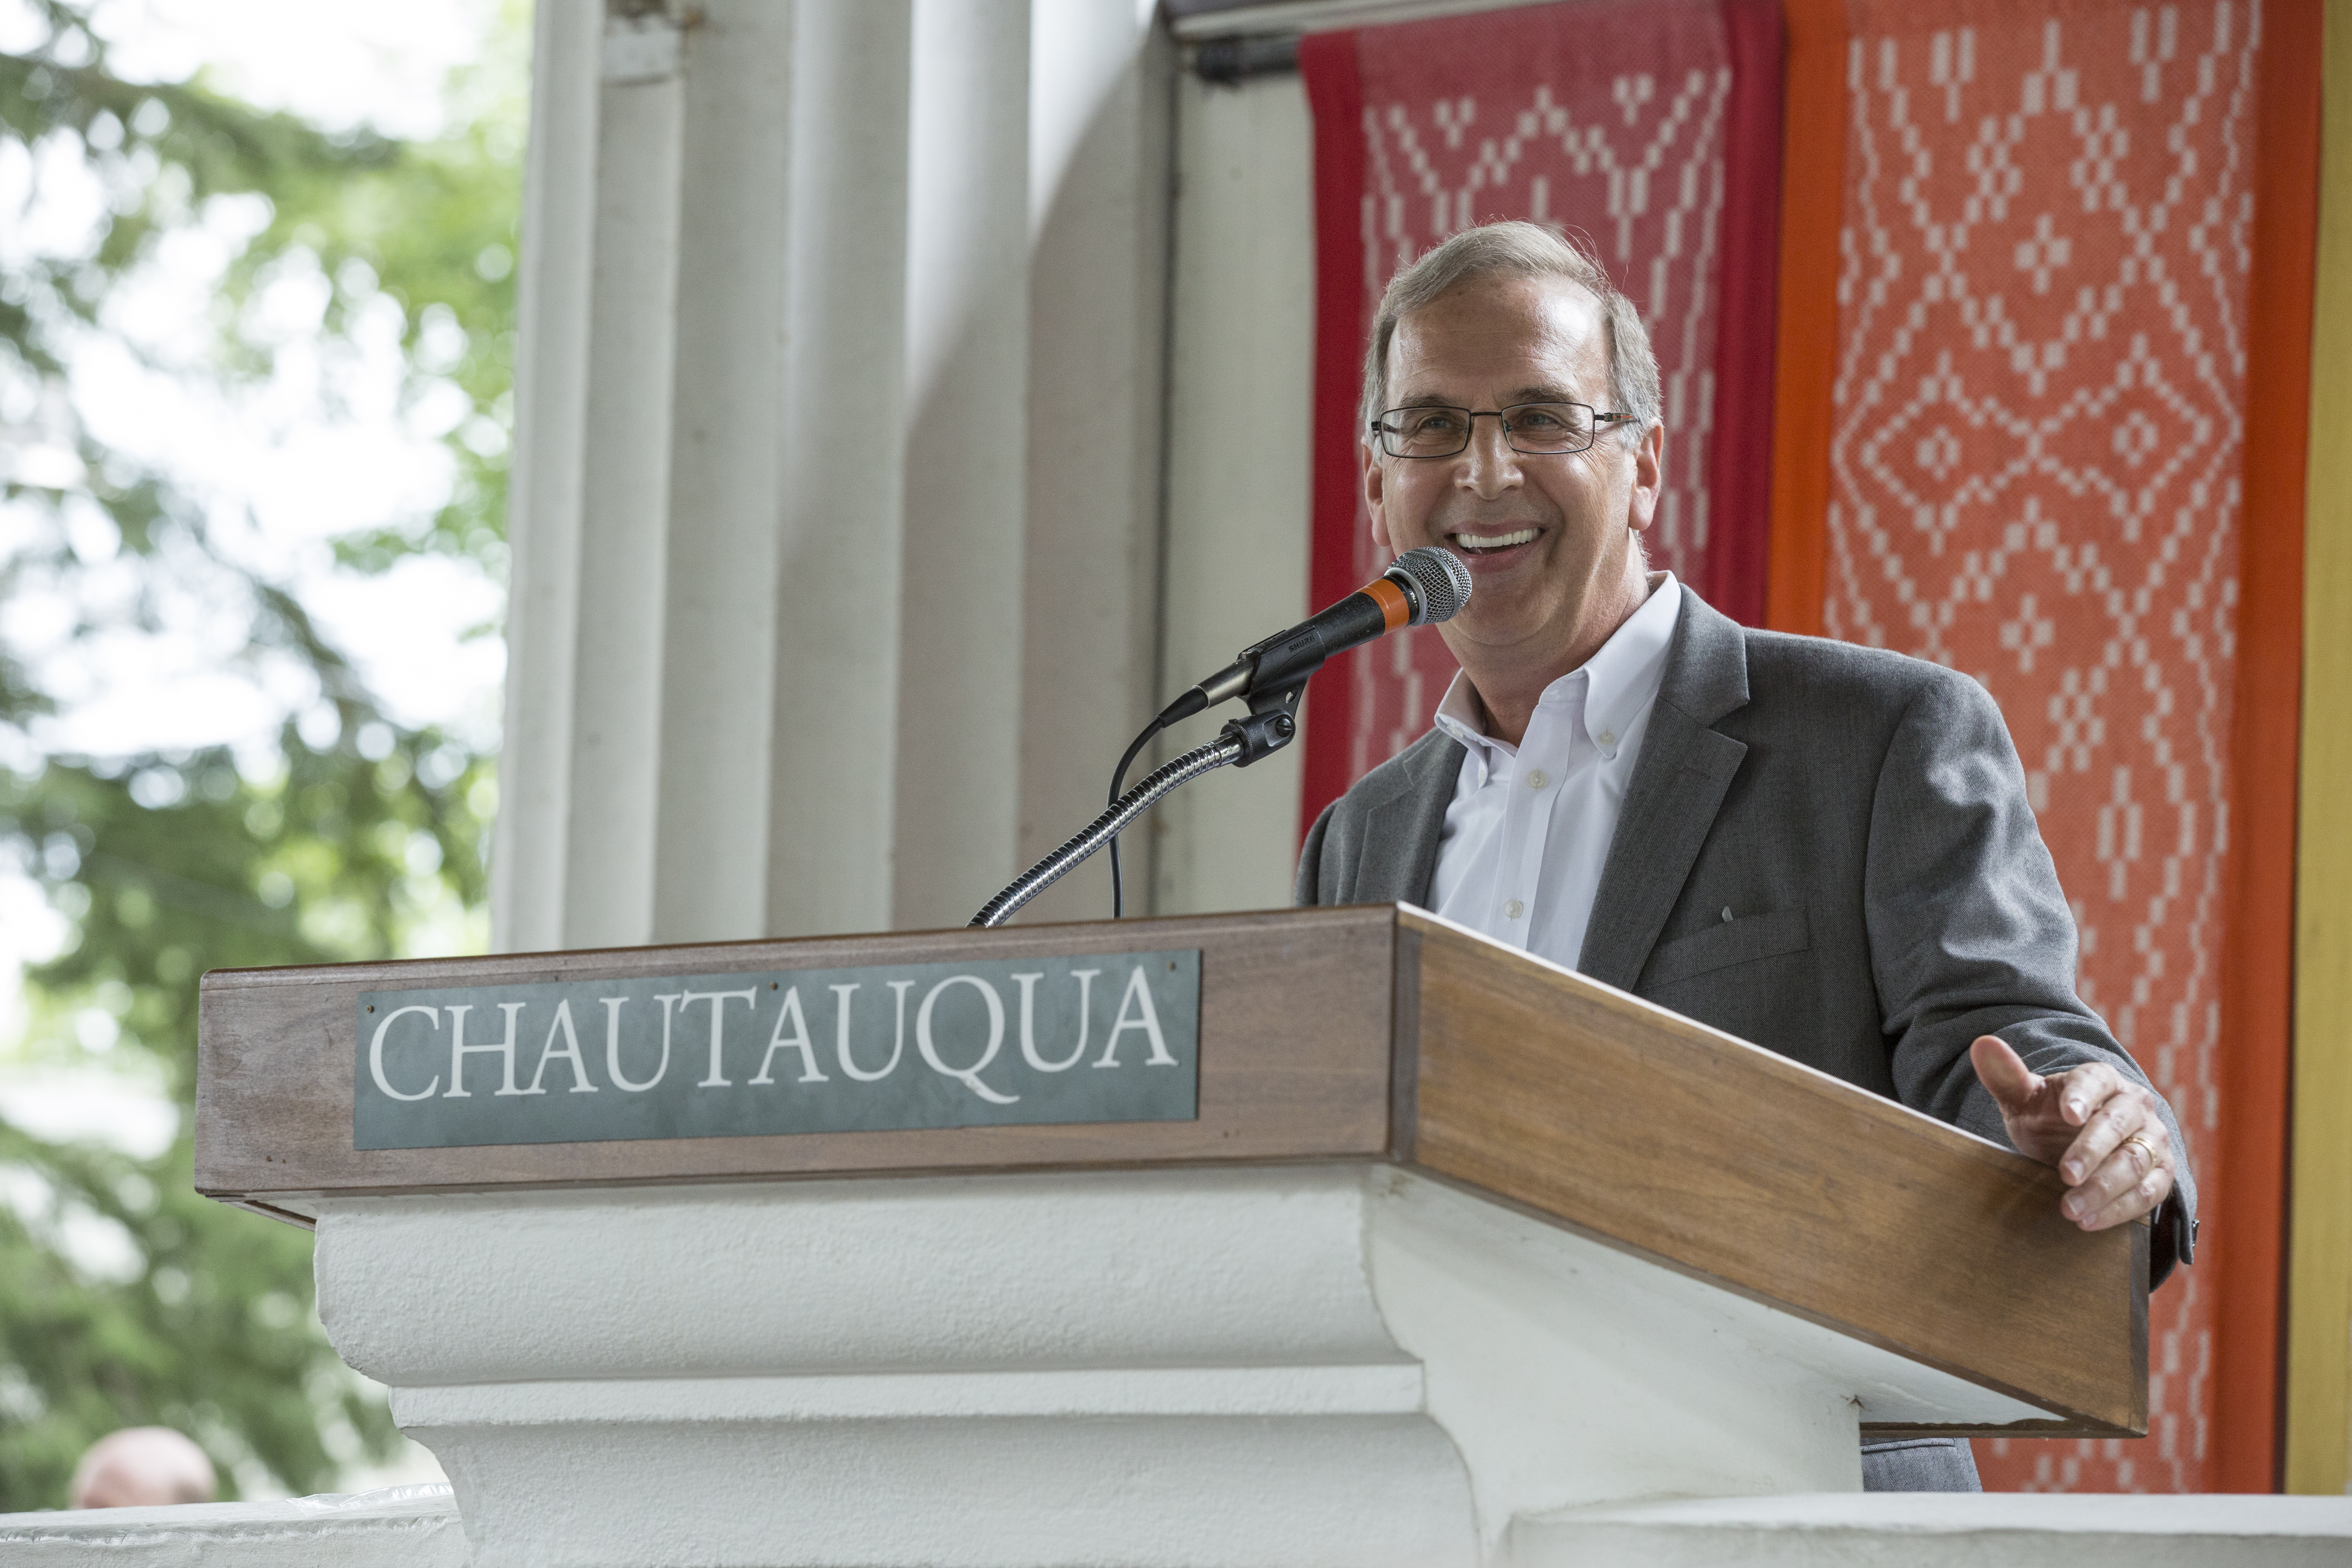 Rabbi Sid Schwarz smiling, standing at a podium with a sign on it reading "CHAUTAUQUA", on an outdoor stage with trees and a rainbow wall hanging behind him